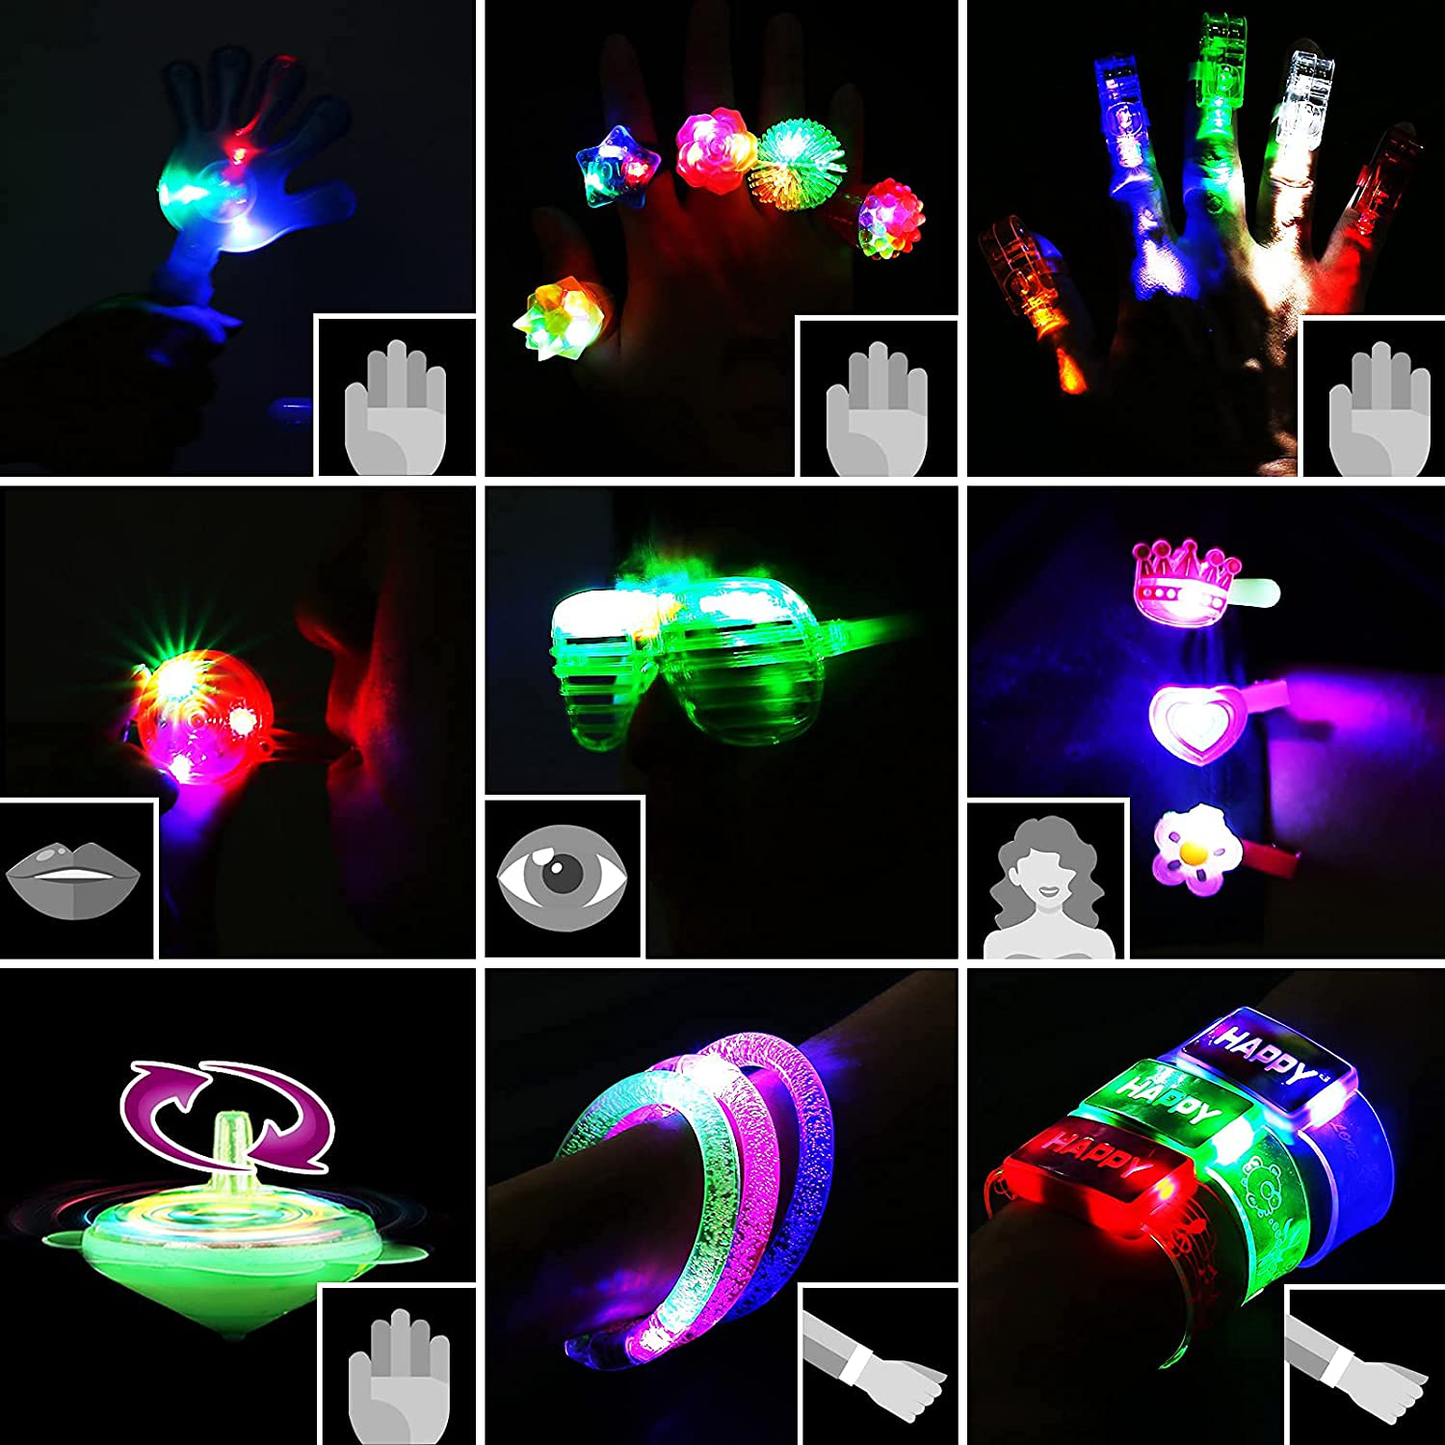 82Pcs LED Light up Toy Bulk Party Favors, Glow in the Dark Party Supplies for Boy Girl with 50 Finger Light,6 Jelly Ring, 6 Glasses,5 Spinning Top, 3 Bracelet,3 Hairpin, 3 Whistle, 3 Hand Clap,3 Watch